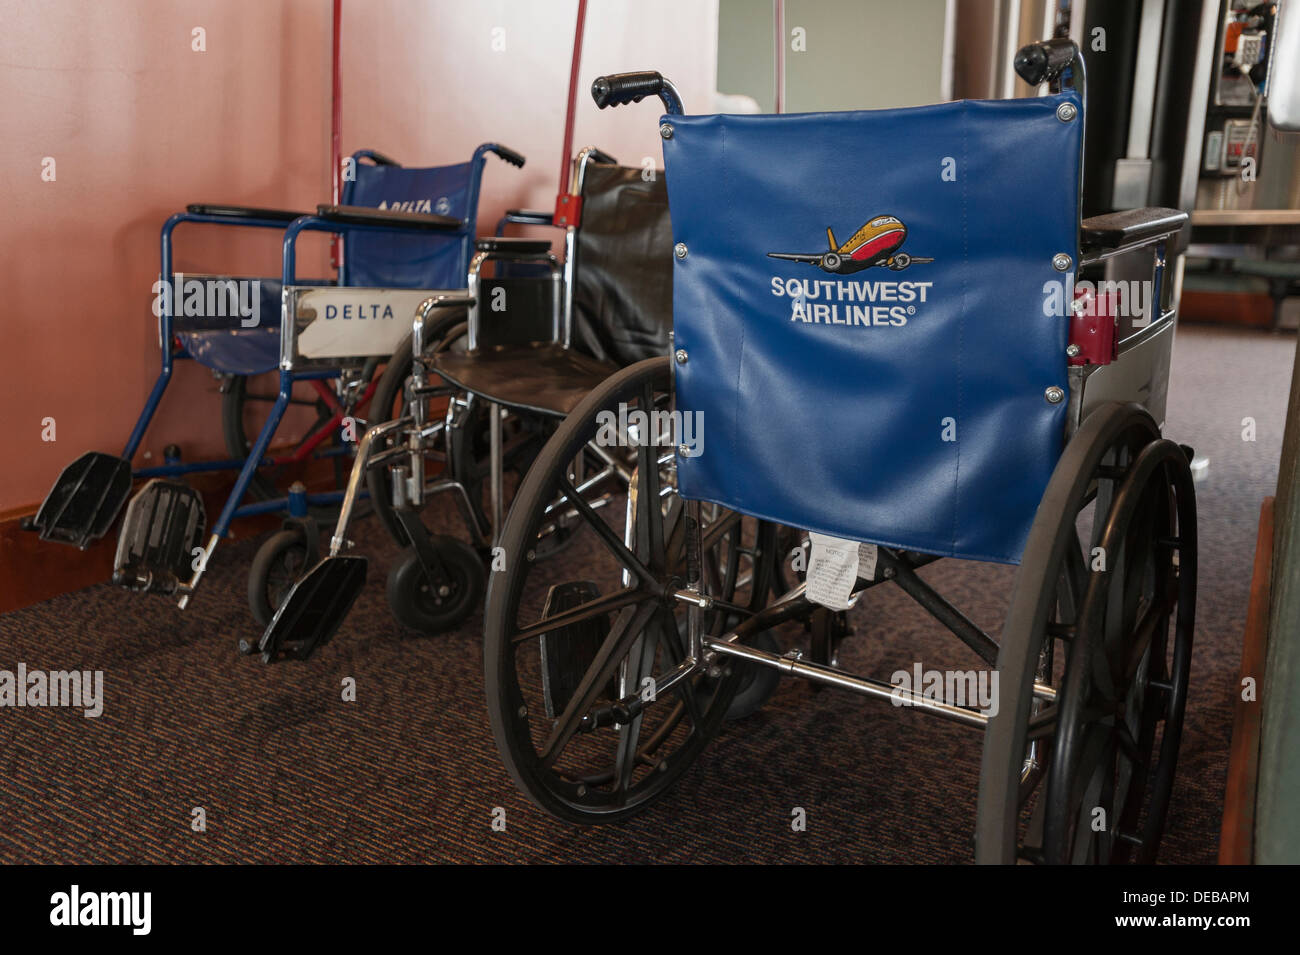 Southwest  Delta Airlines Wheel Chairs located in the Providence Rhode Island T F Green Airport Stock Photo